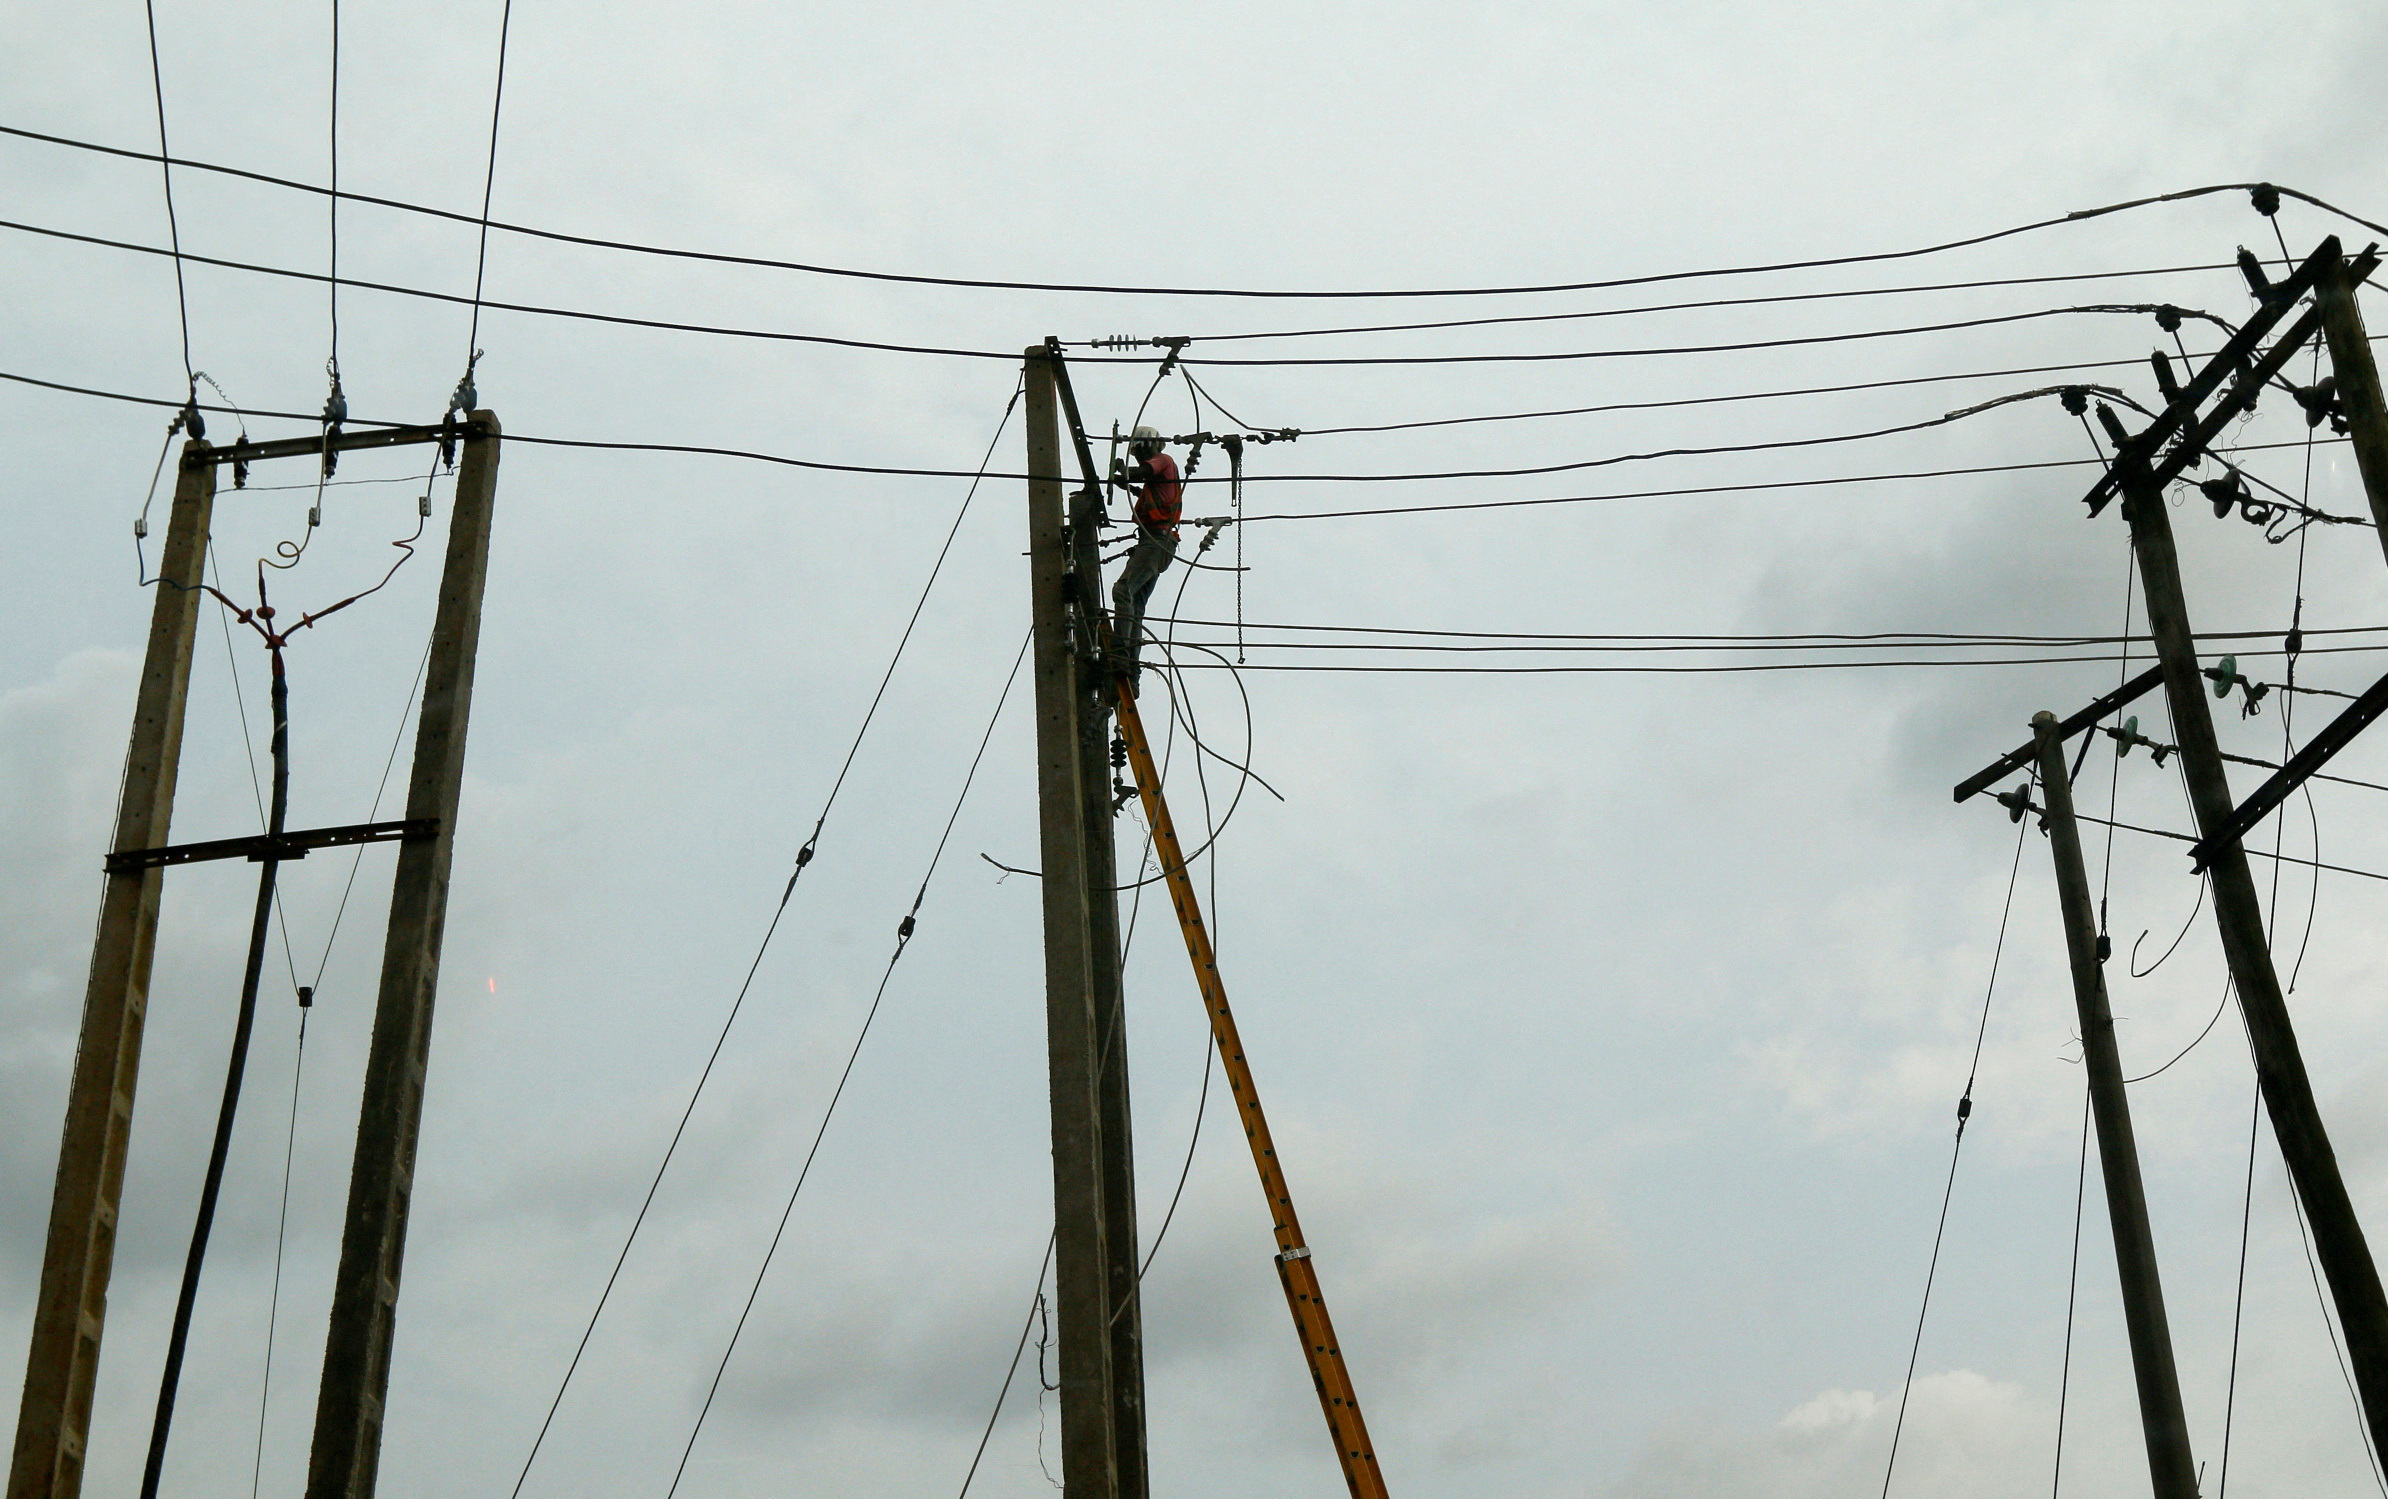 A power labourer fixes electric cables on a pole in Ojodu district in Lagos